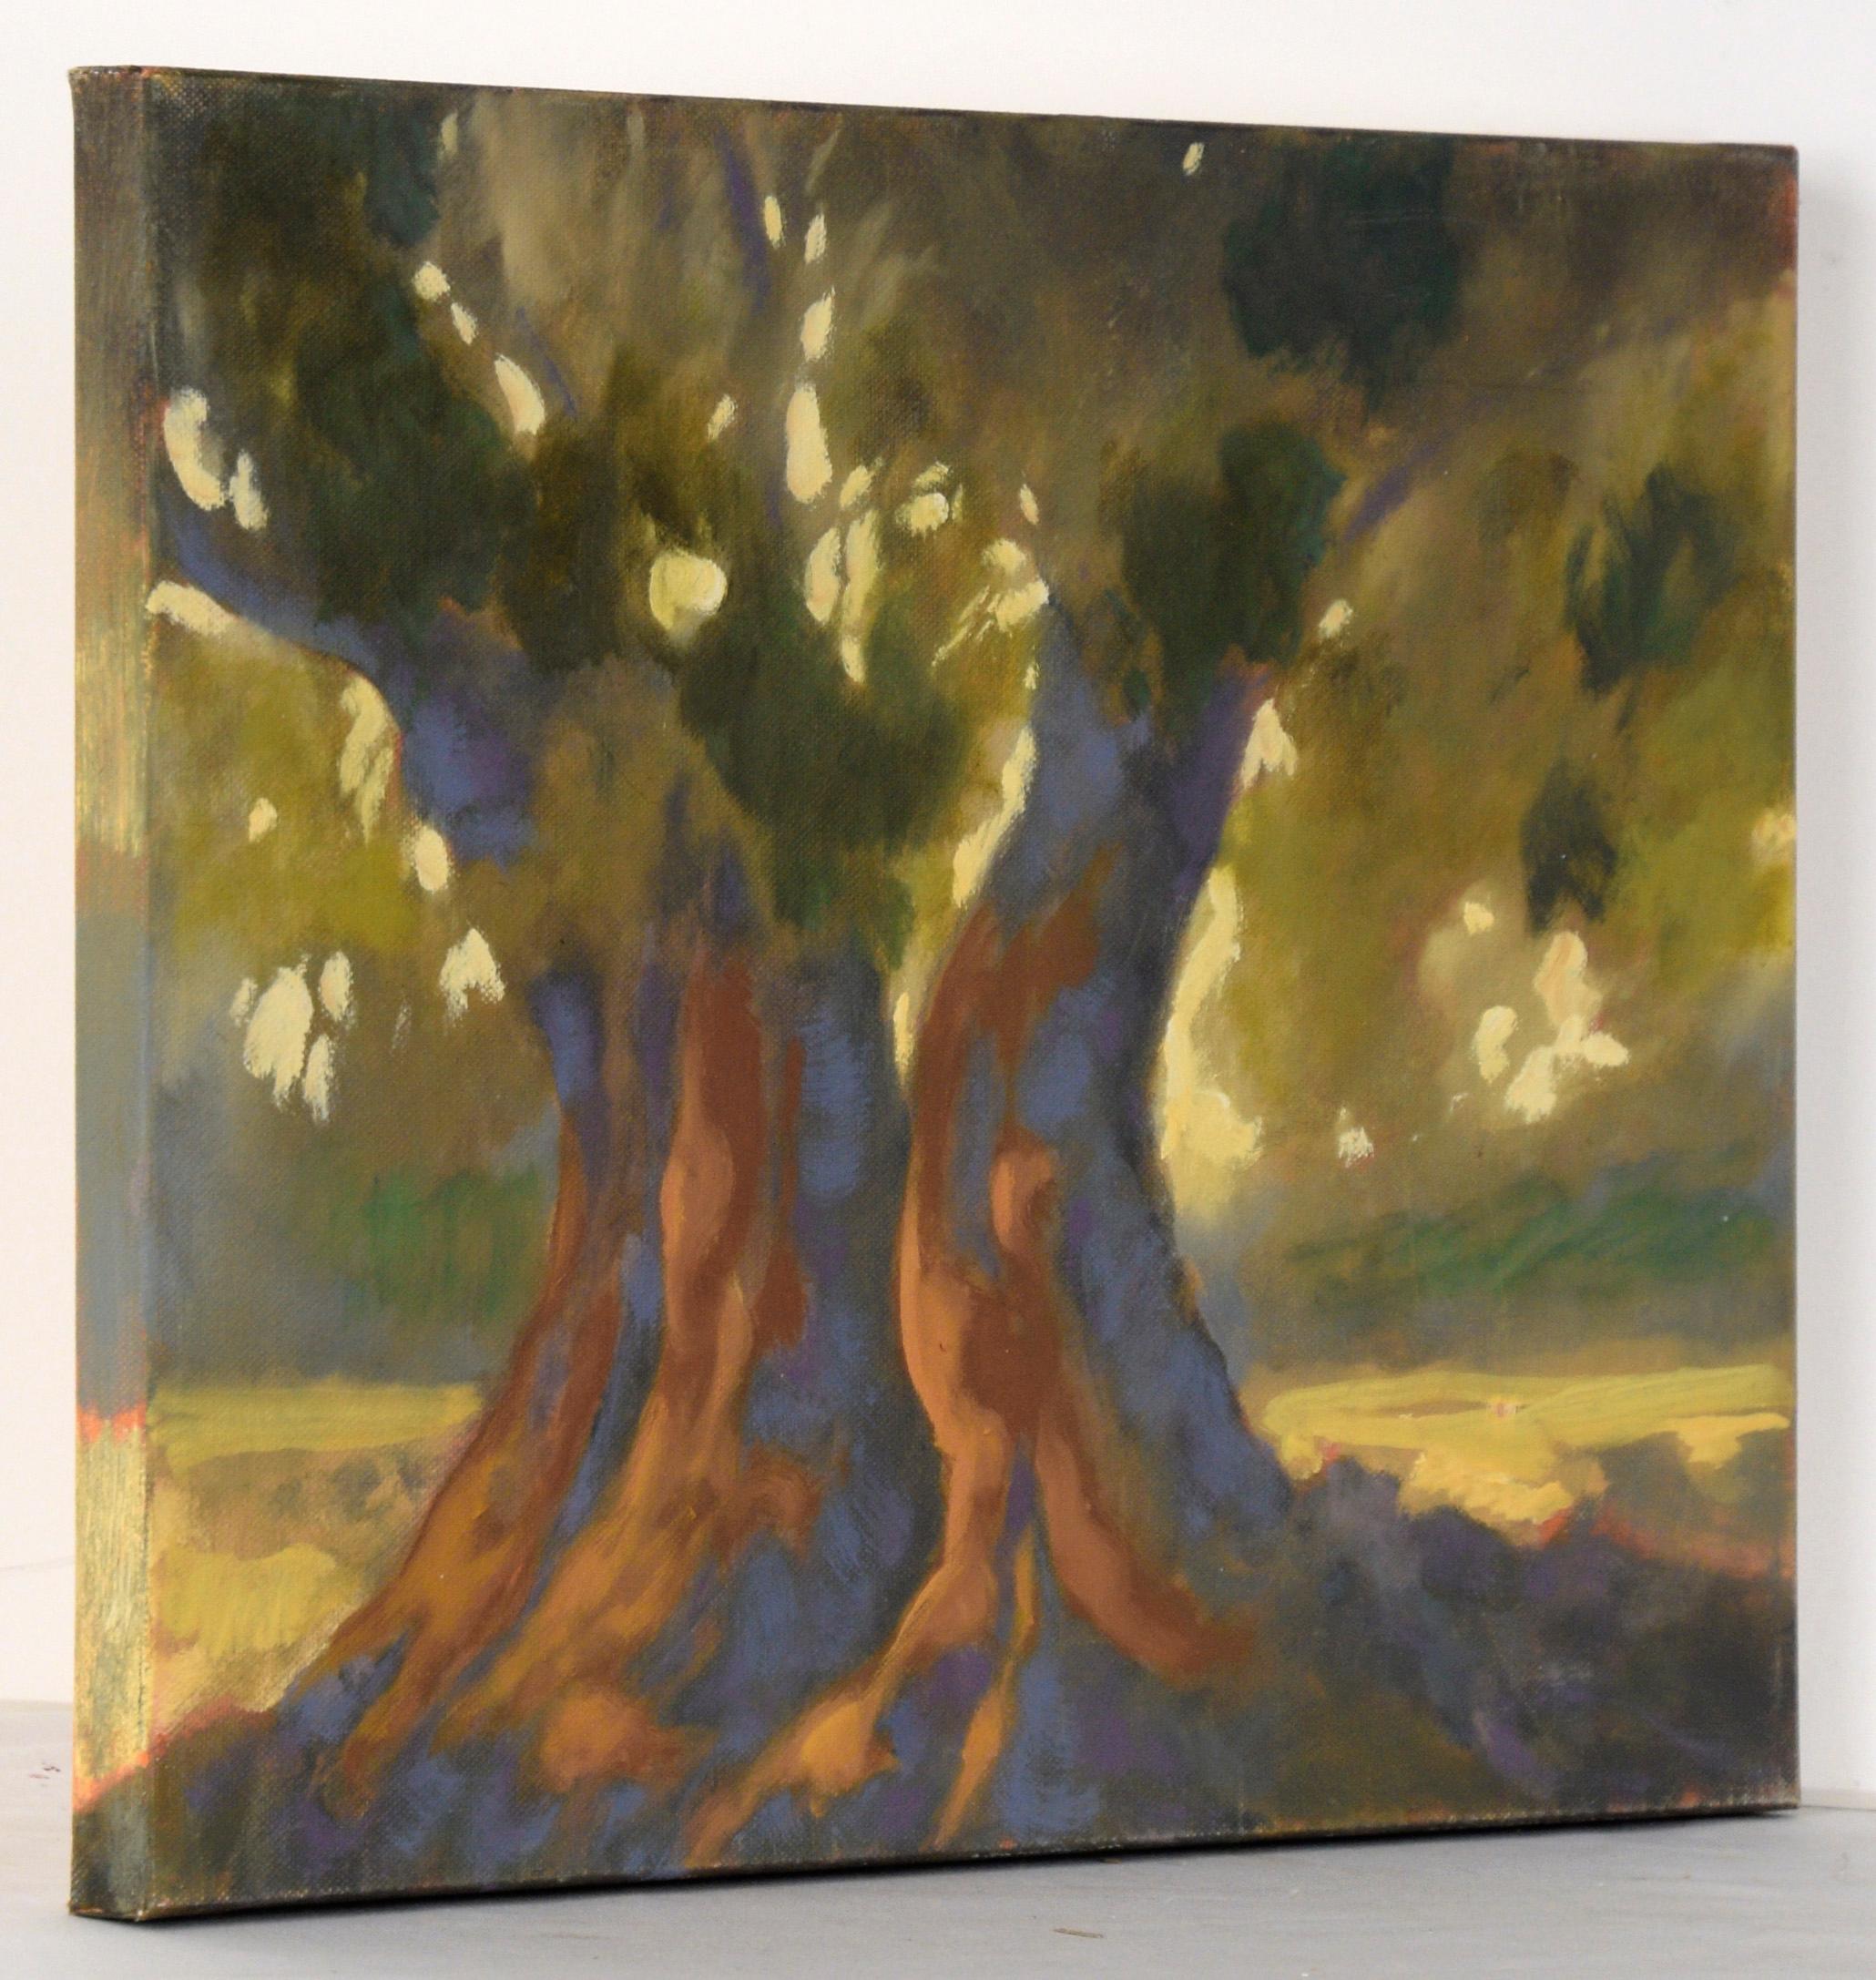 Sunlight Through the Oak Trees in Acrylic on Canvas

Landscape with oak trees by an unknown central California coast artist Maria Pavao Hadsell (Portugal/American, 20th Century). A large oak tree with three trunks is glowing in the sunlight. The